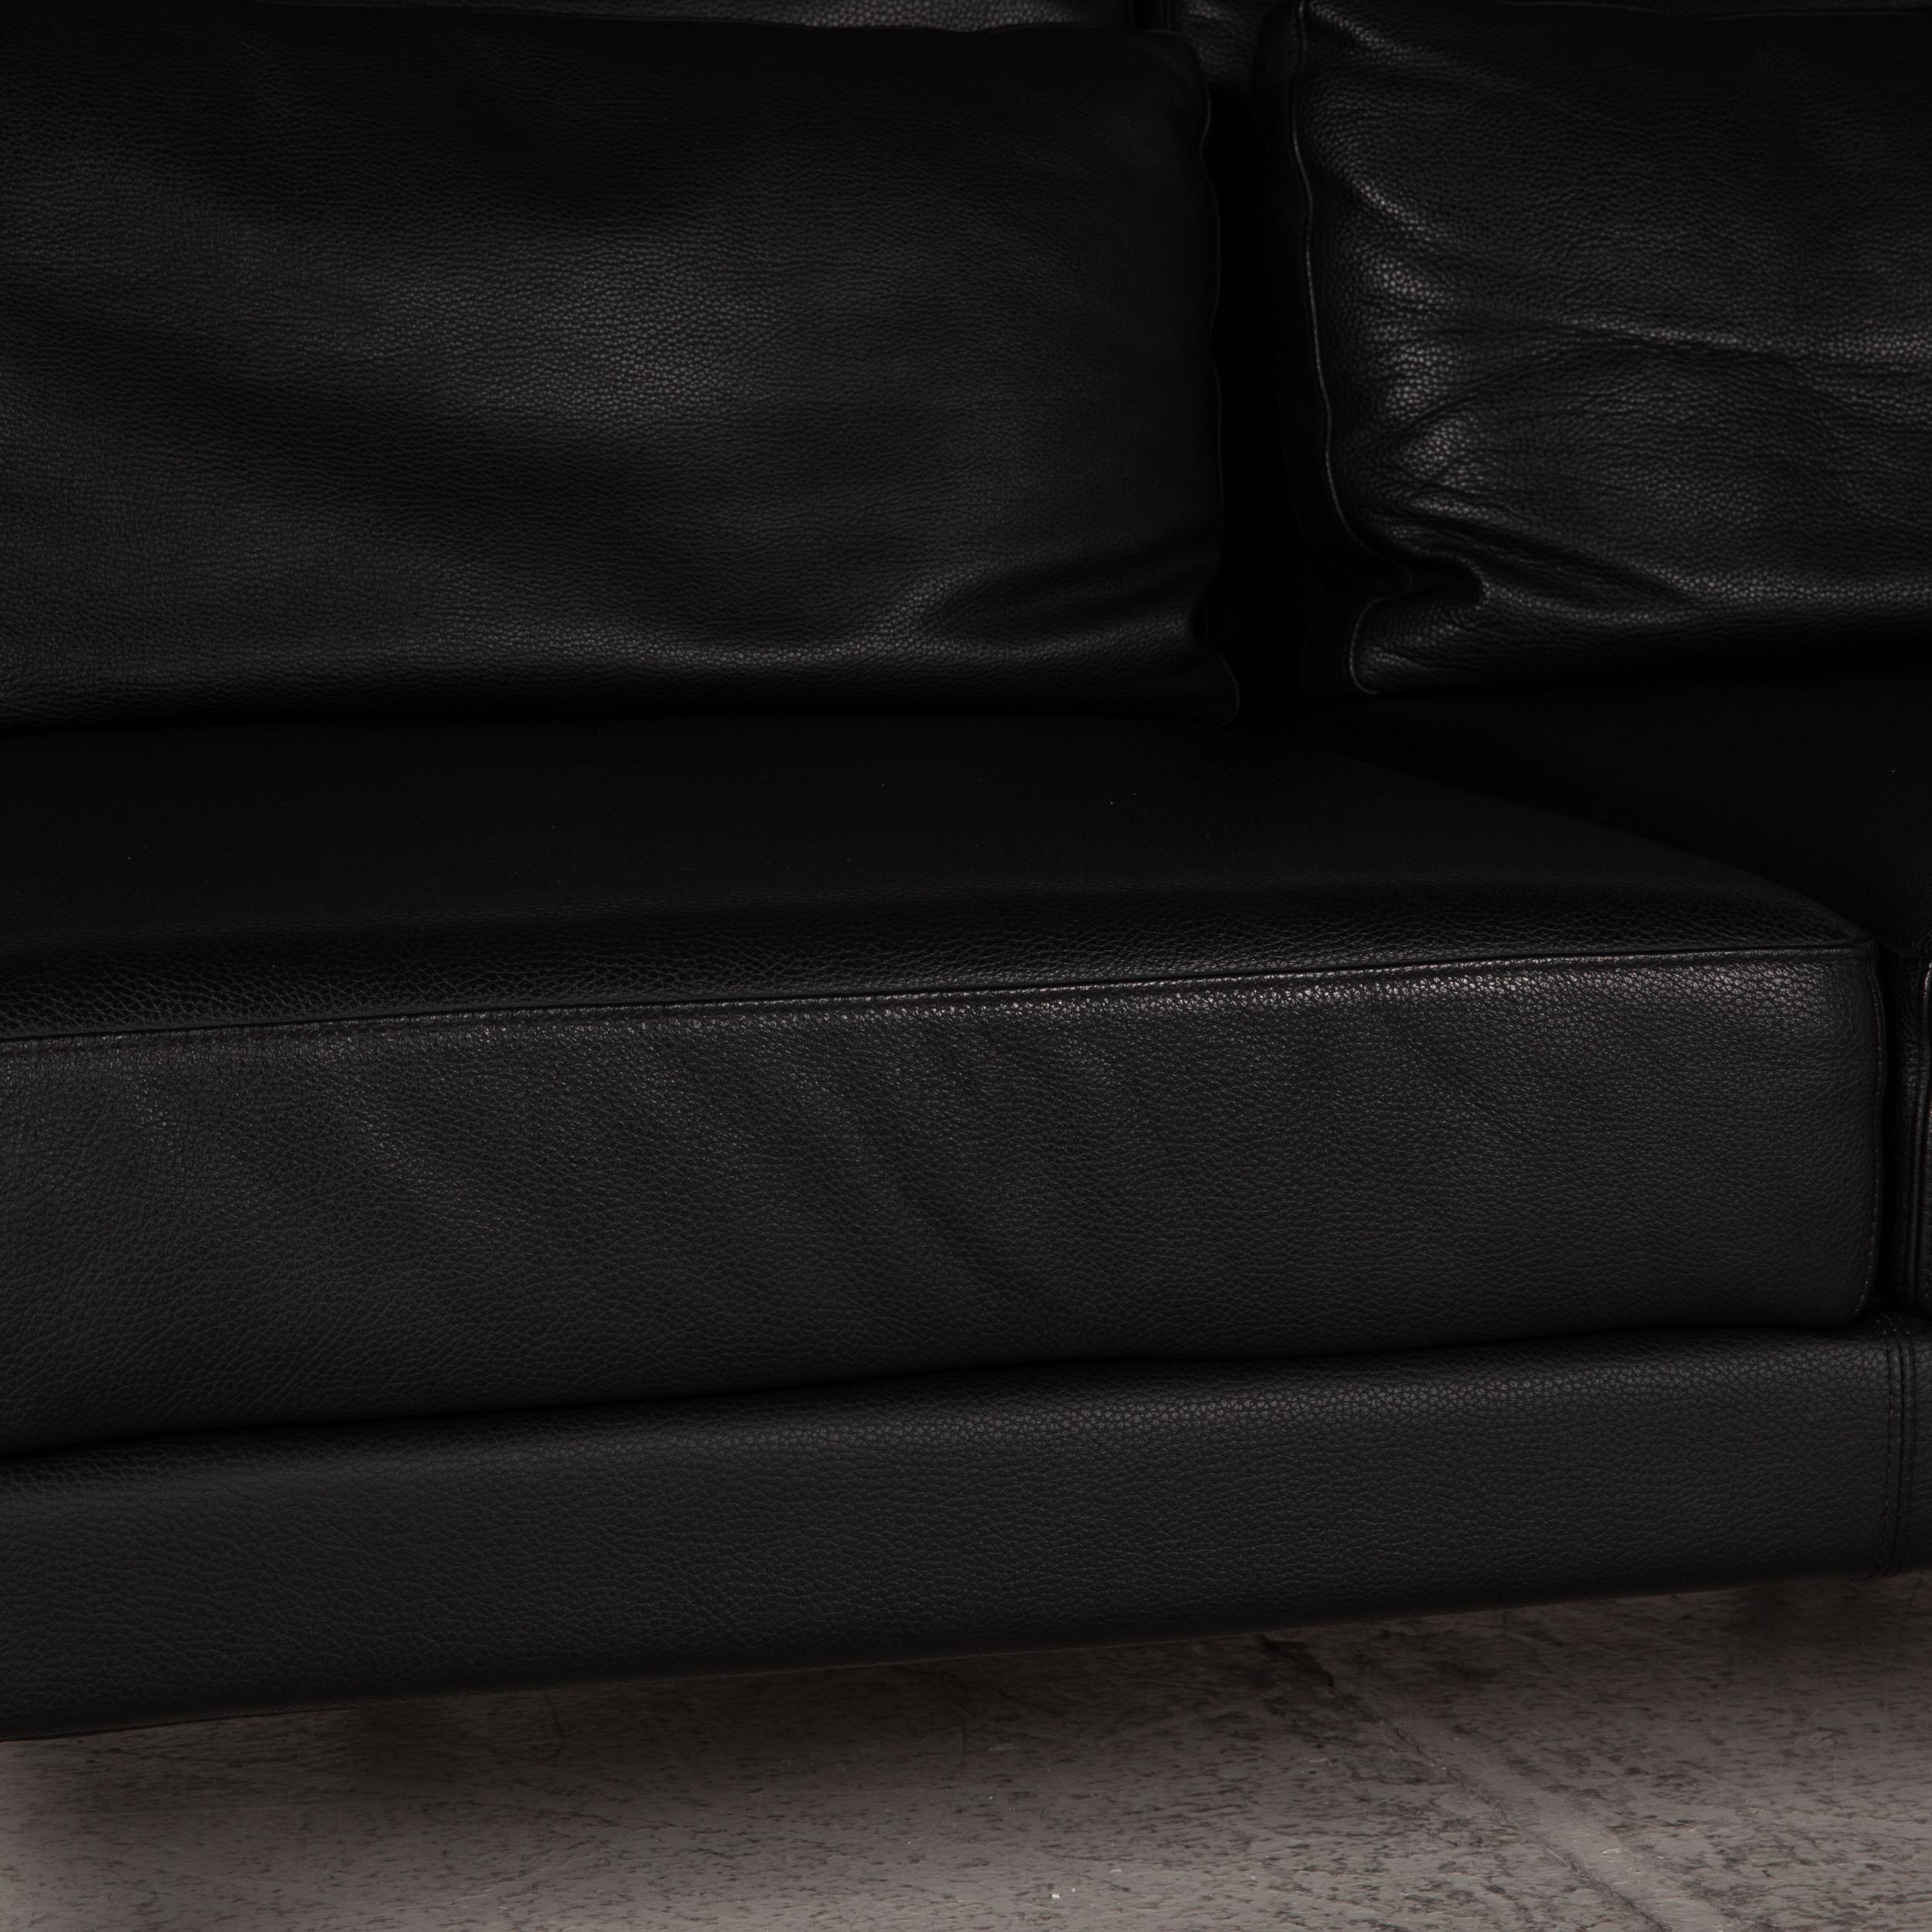 Modern Brühl & Sippold Moule Leather Sofa Black Two-Seater Couch Function Sleeping For Sale